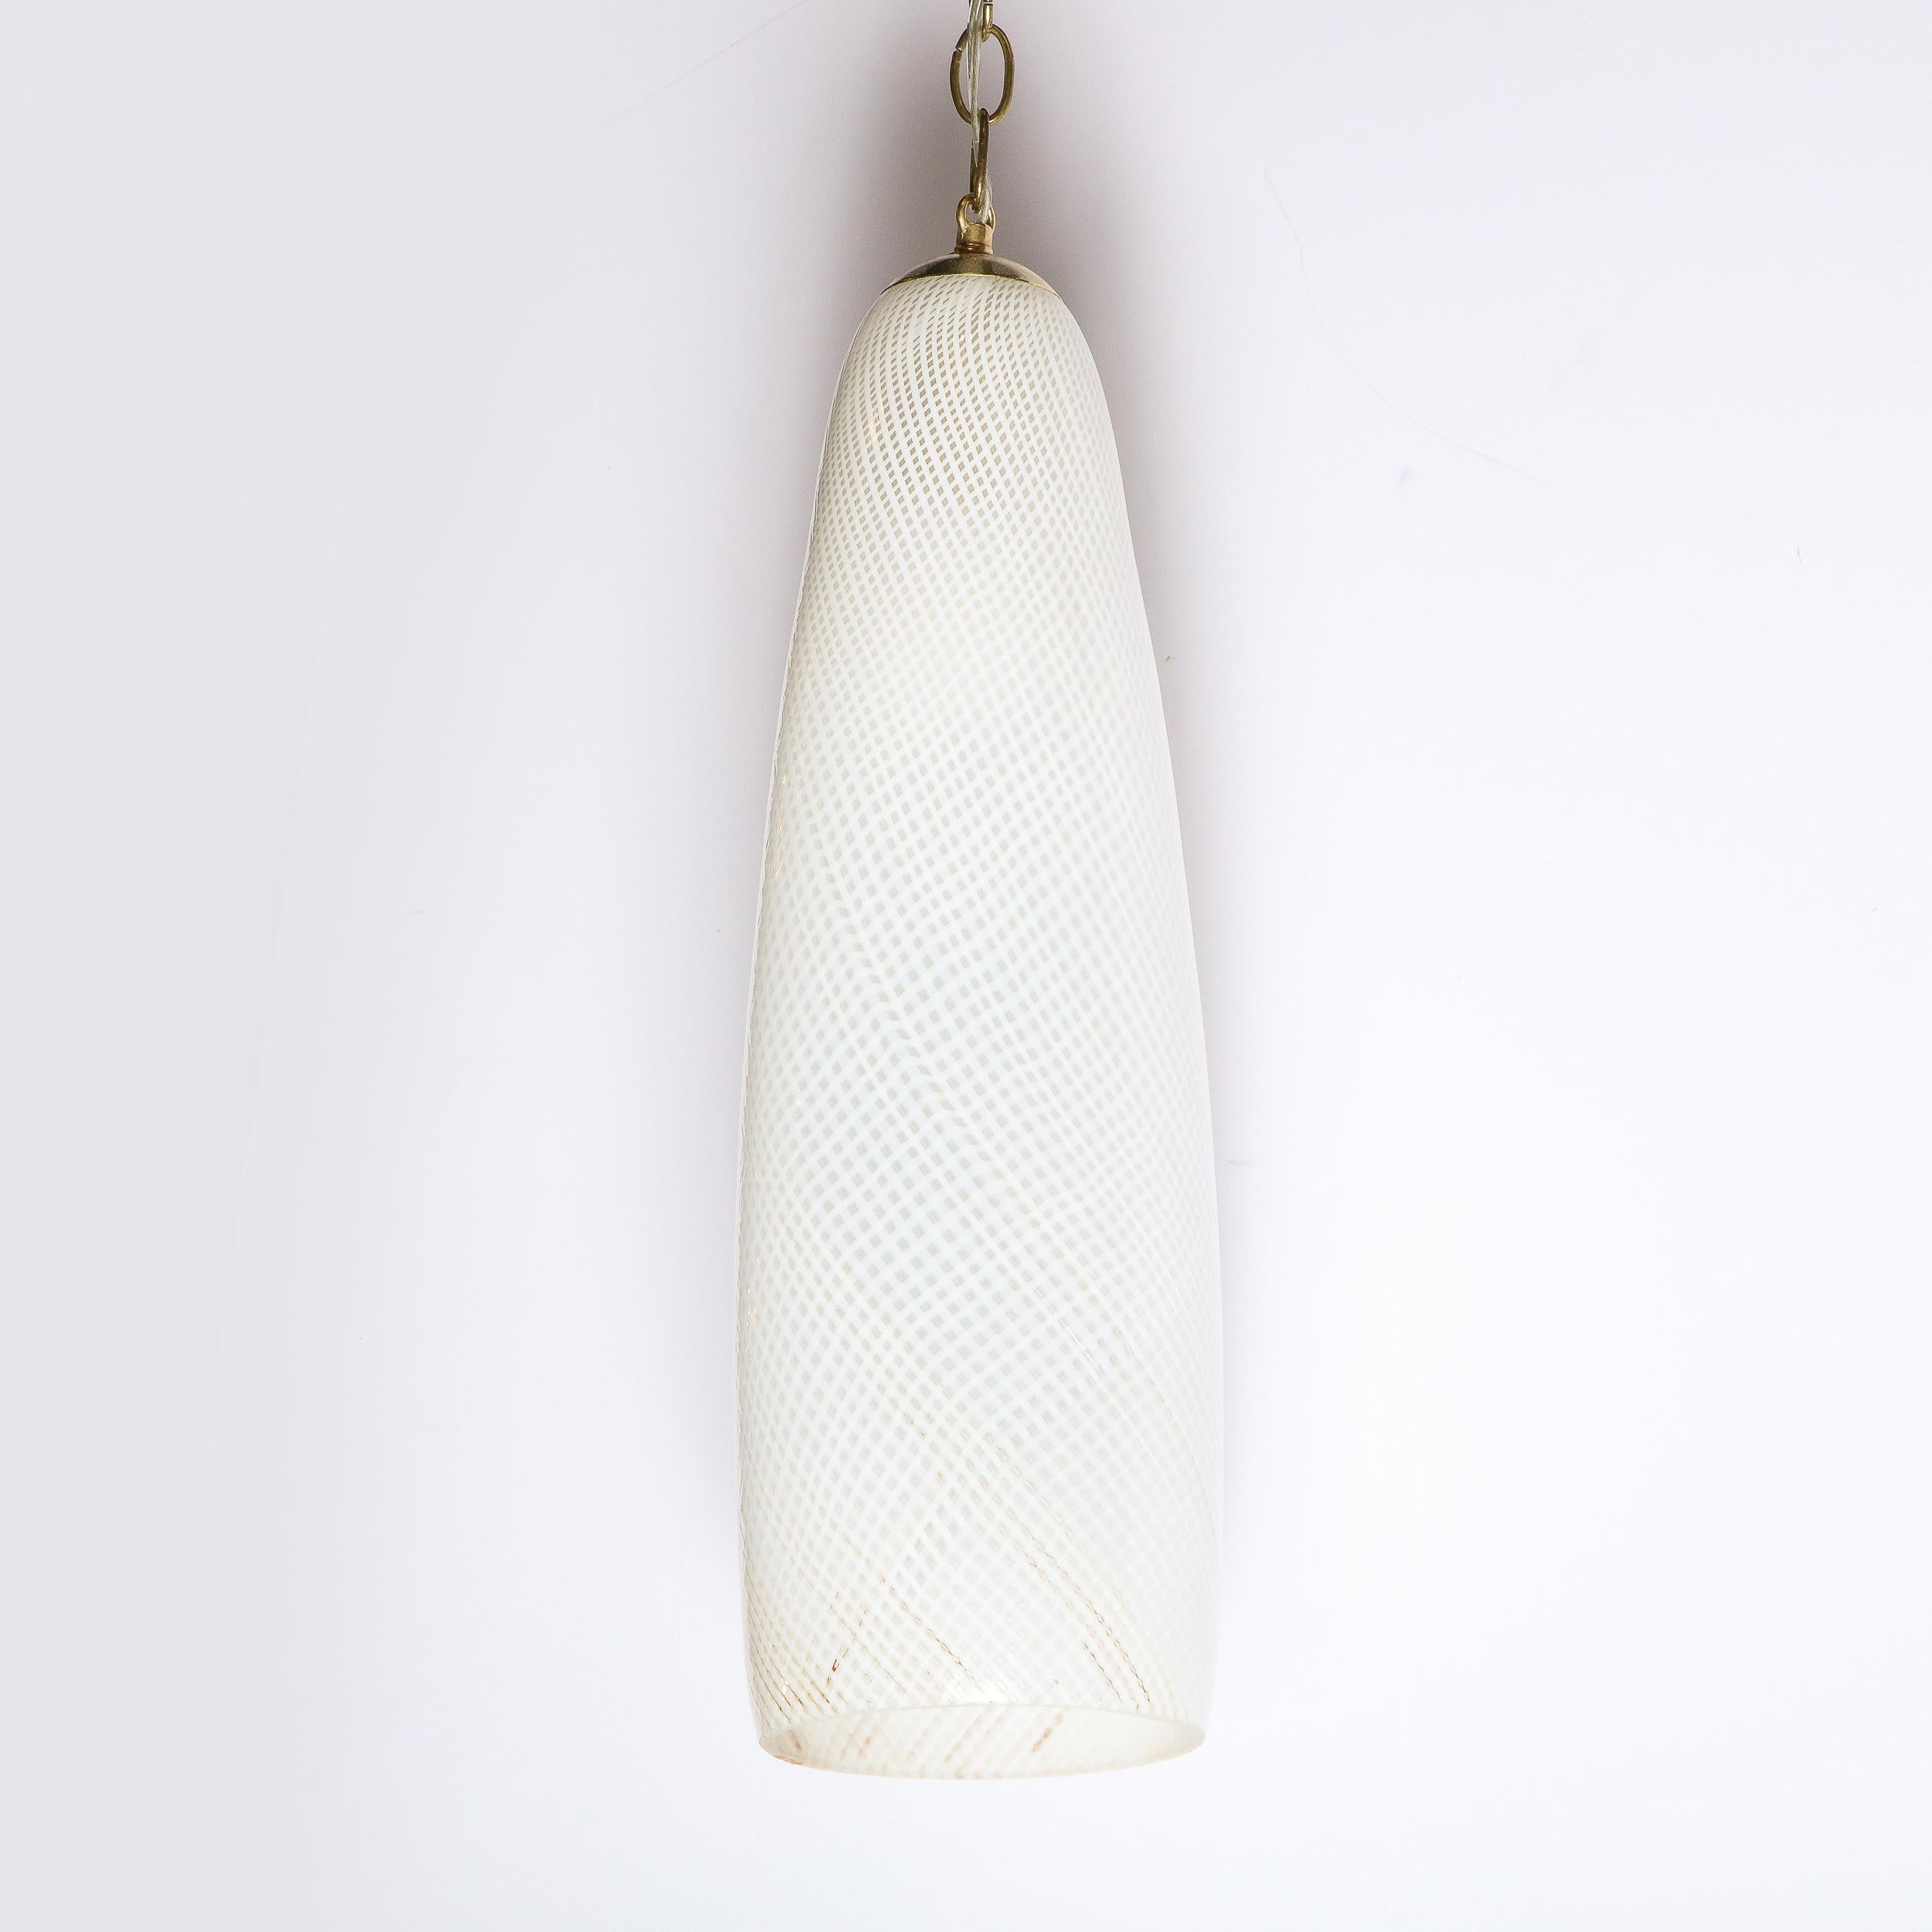 This elegant Mid Century Modern pendant was realized in Murano, Italy- the island off the coast of Venice renowned for centuries for its superlative glass production- circa 1960. It features a cylindrical form that tapers subtle at each end that